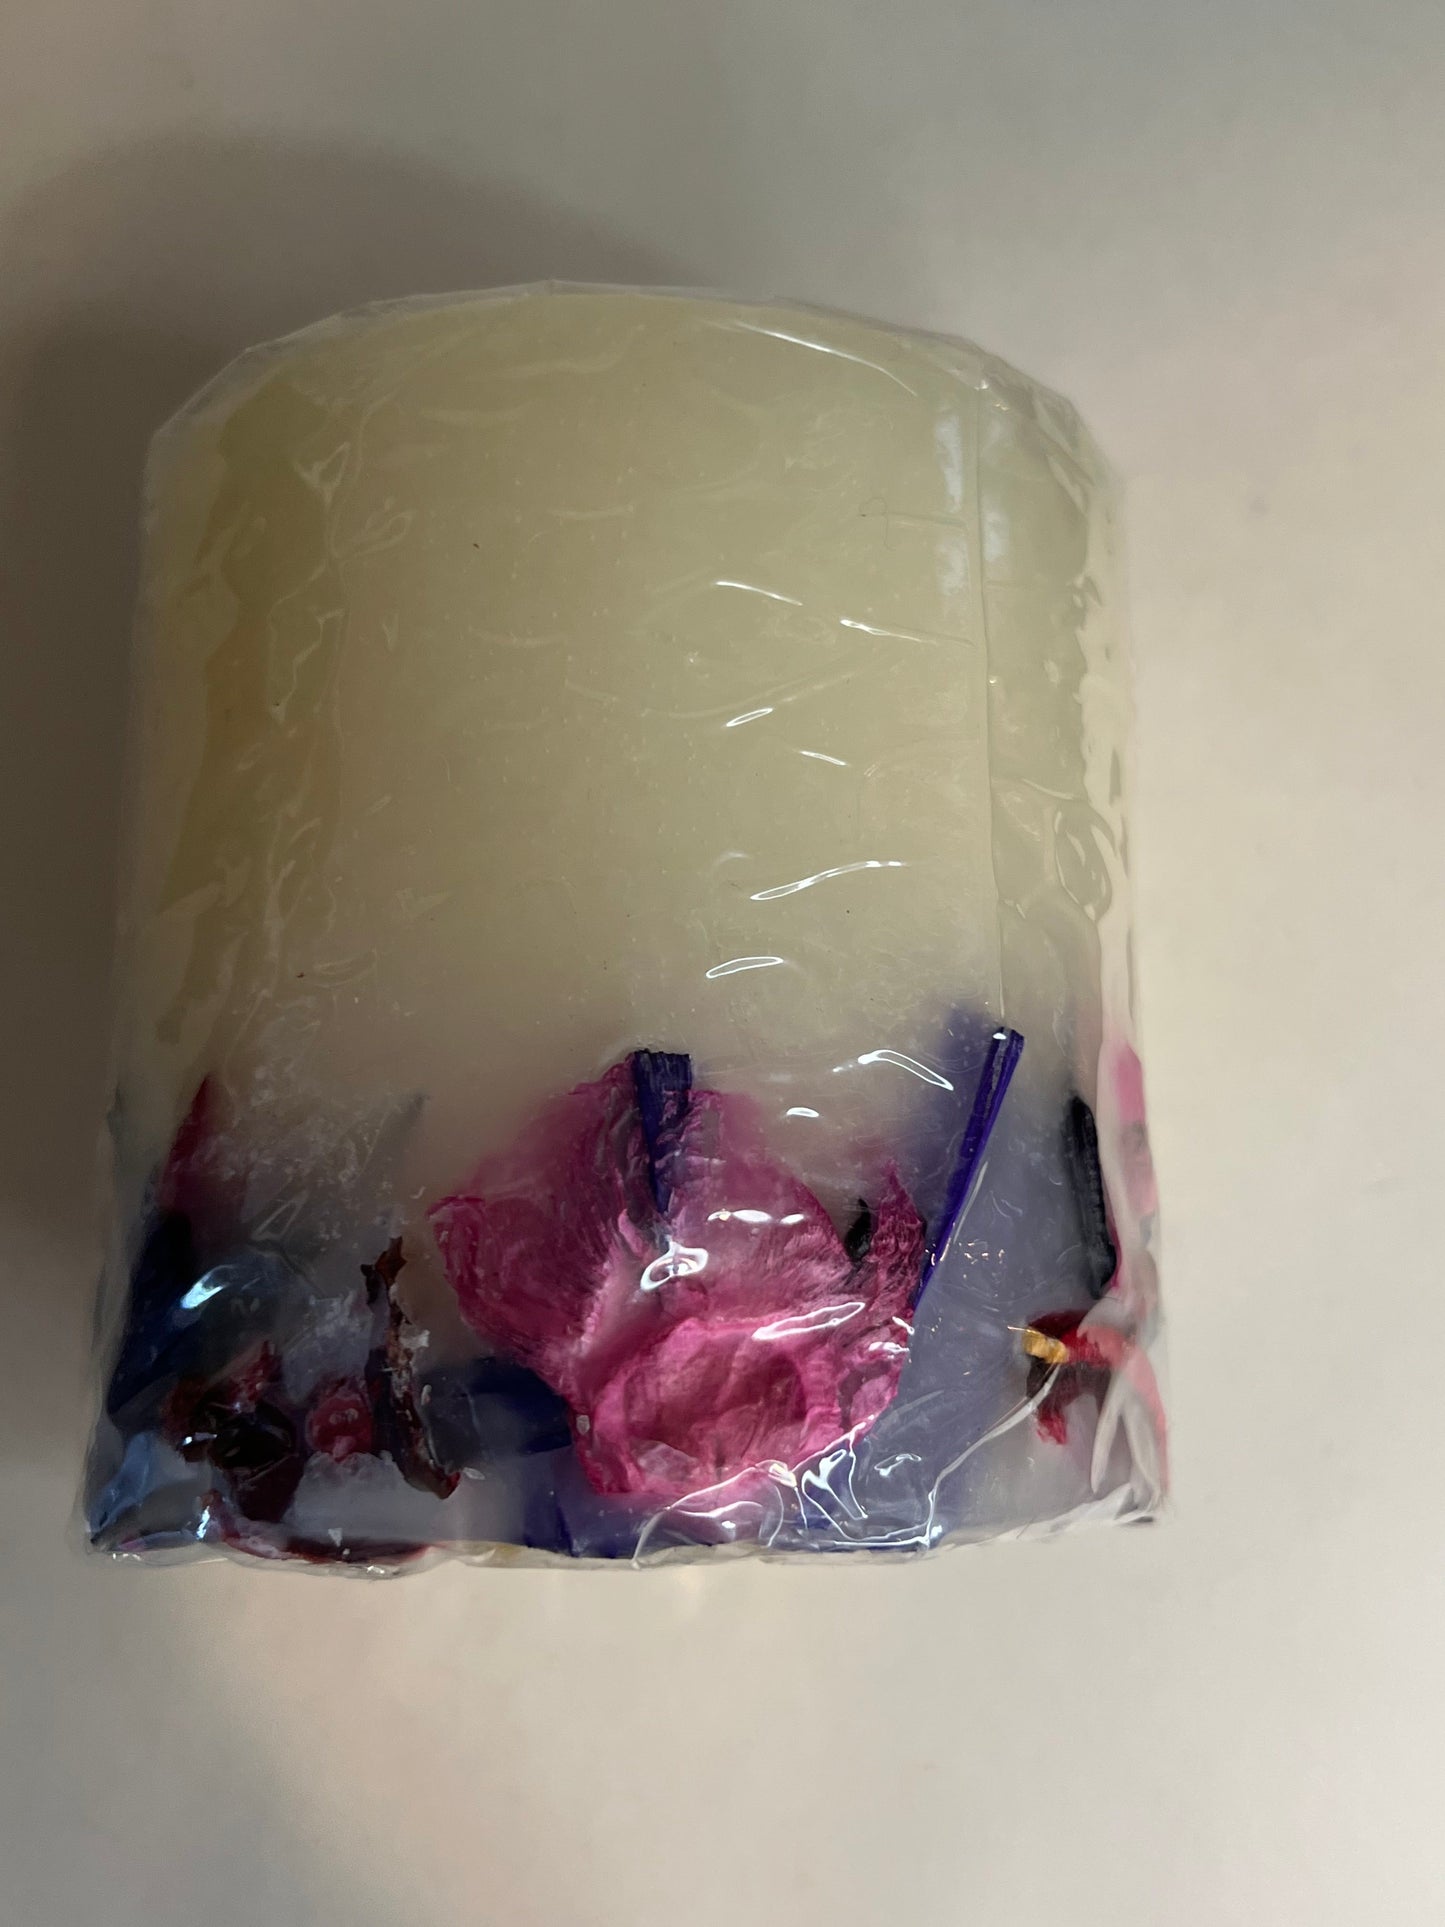 NIP Pentali Company LTD Infused Decorative Candles - Your Choice of Size & Scent